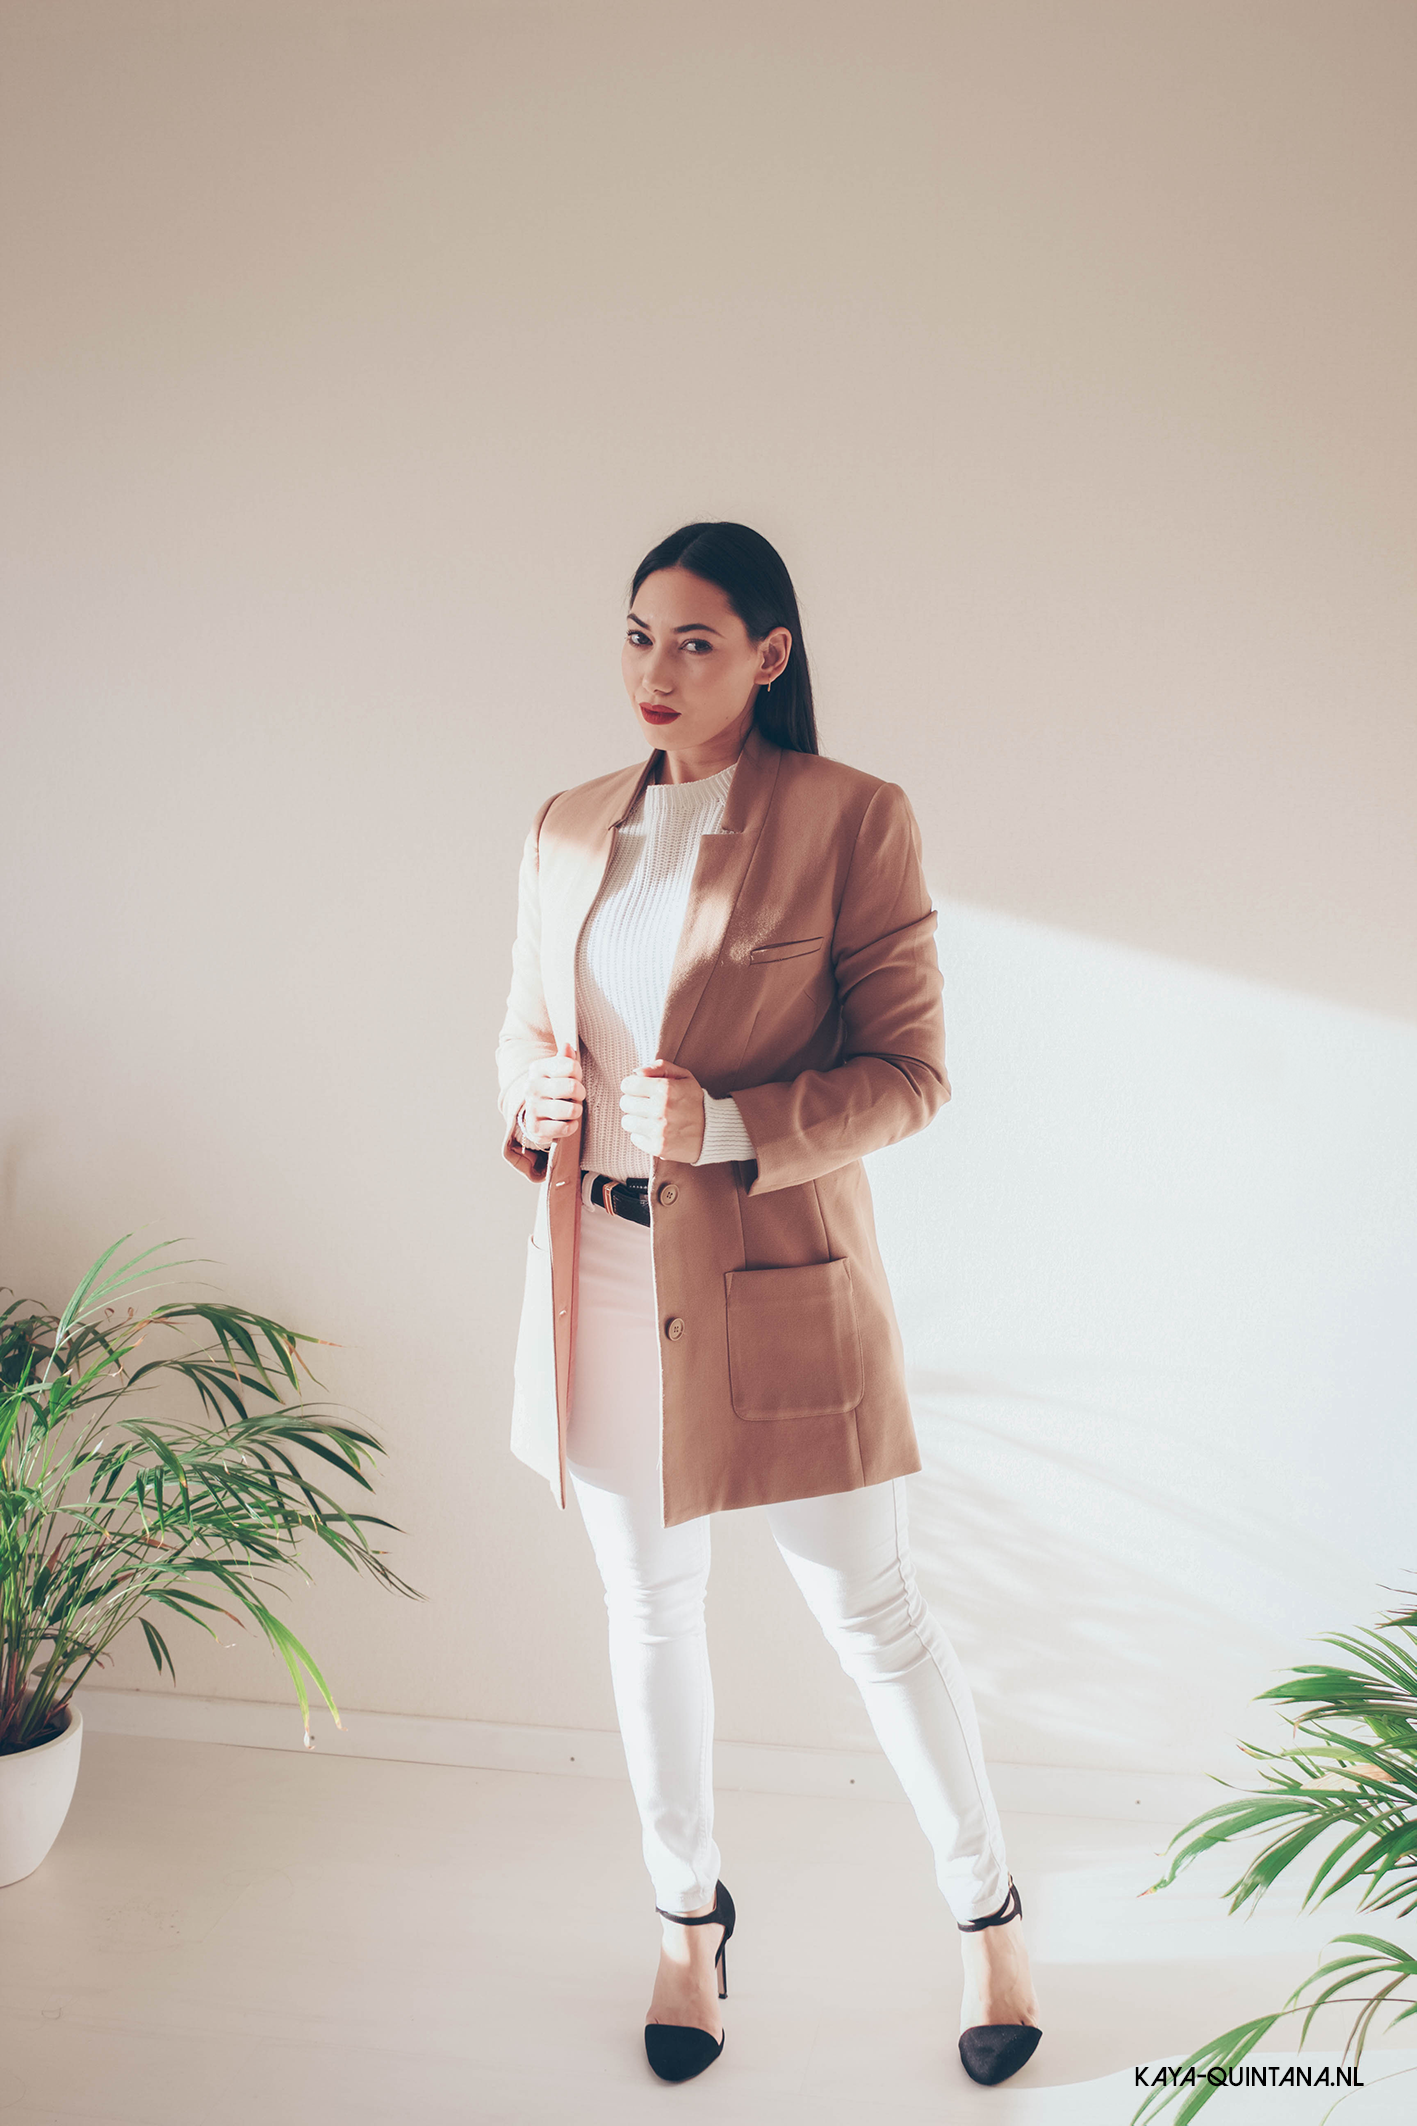                                                    ALL WHITE OUTFIT WITH A CAMEL COAT